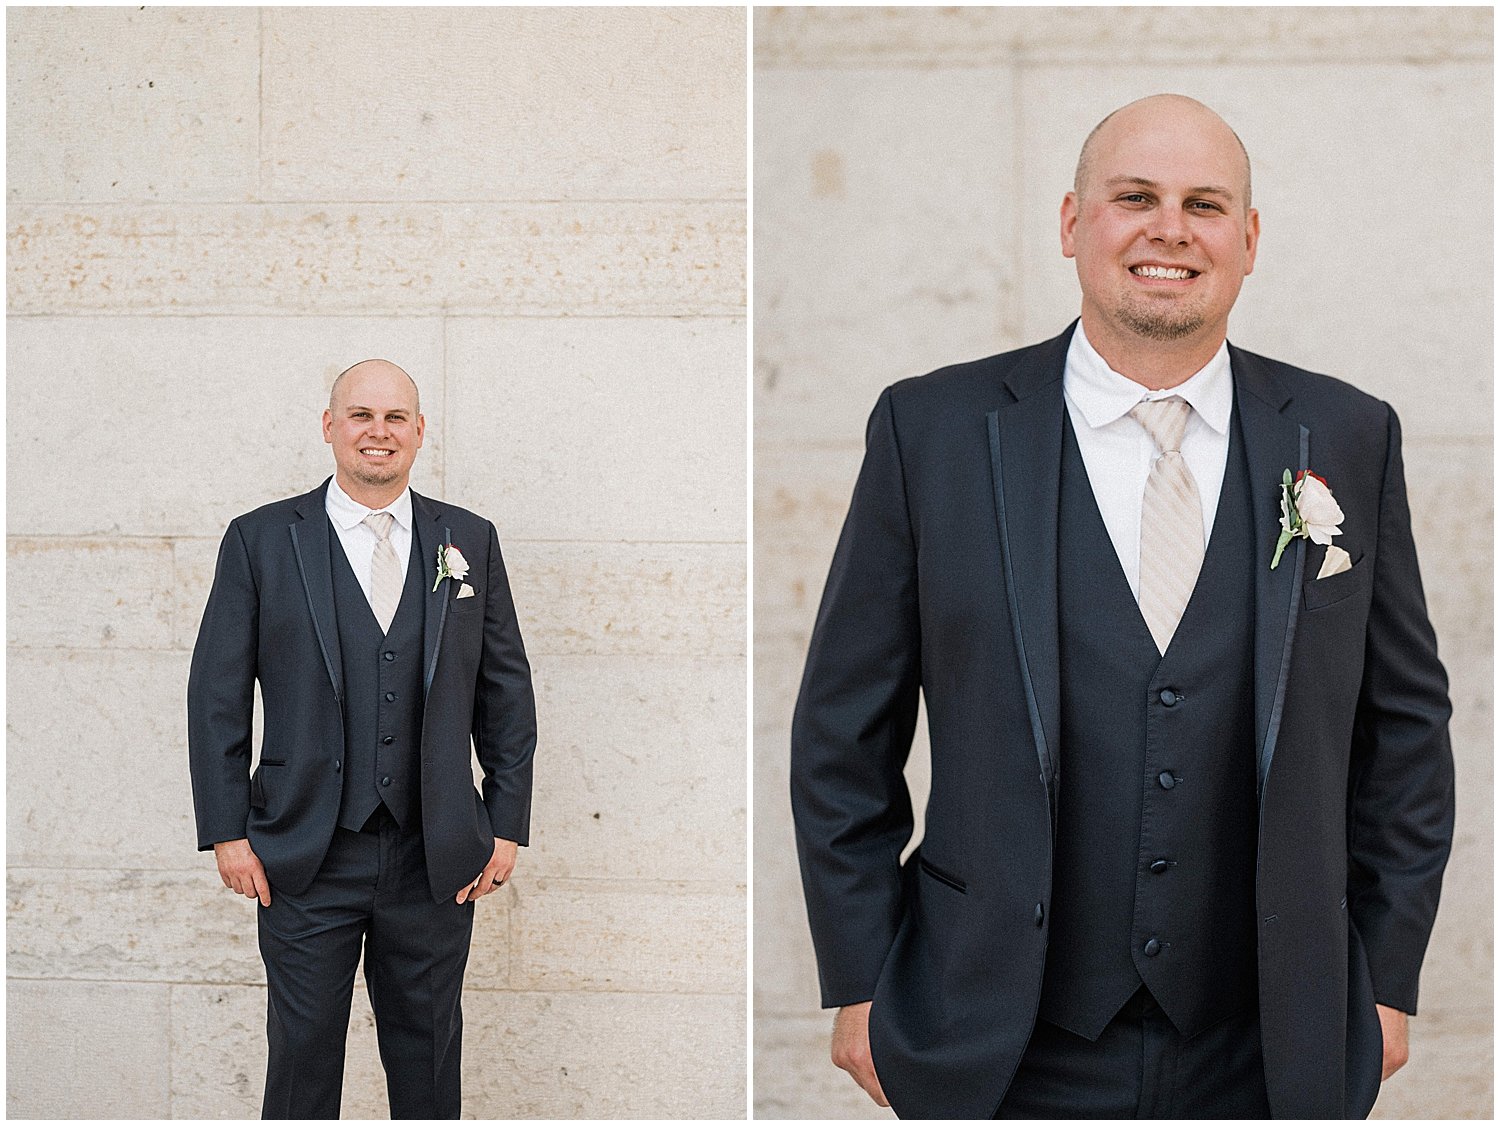 Courthouse Square Wedding Portraits | Downtown Dayton, OH